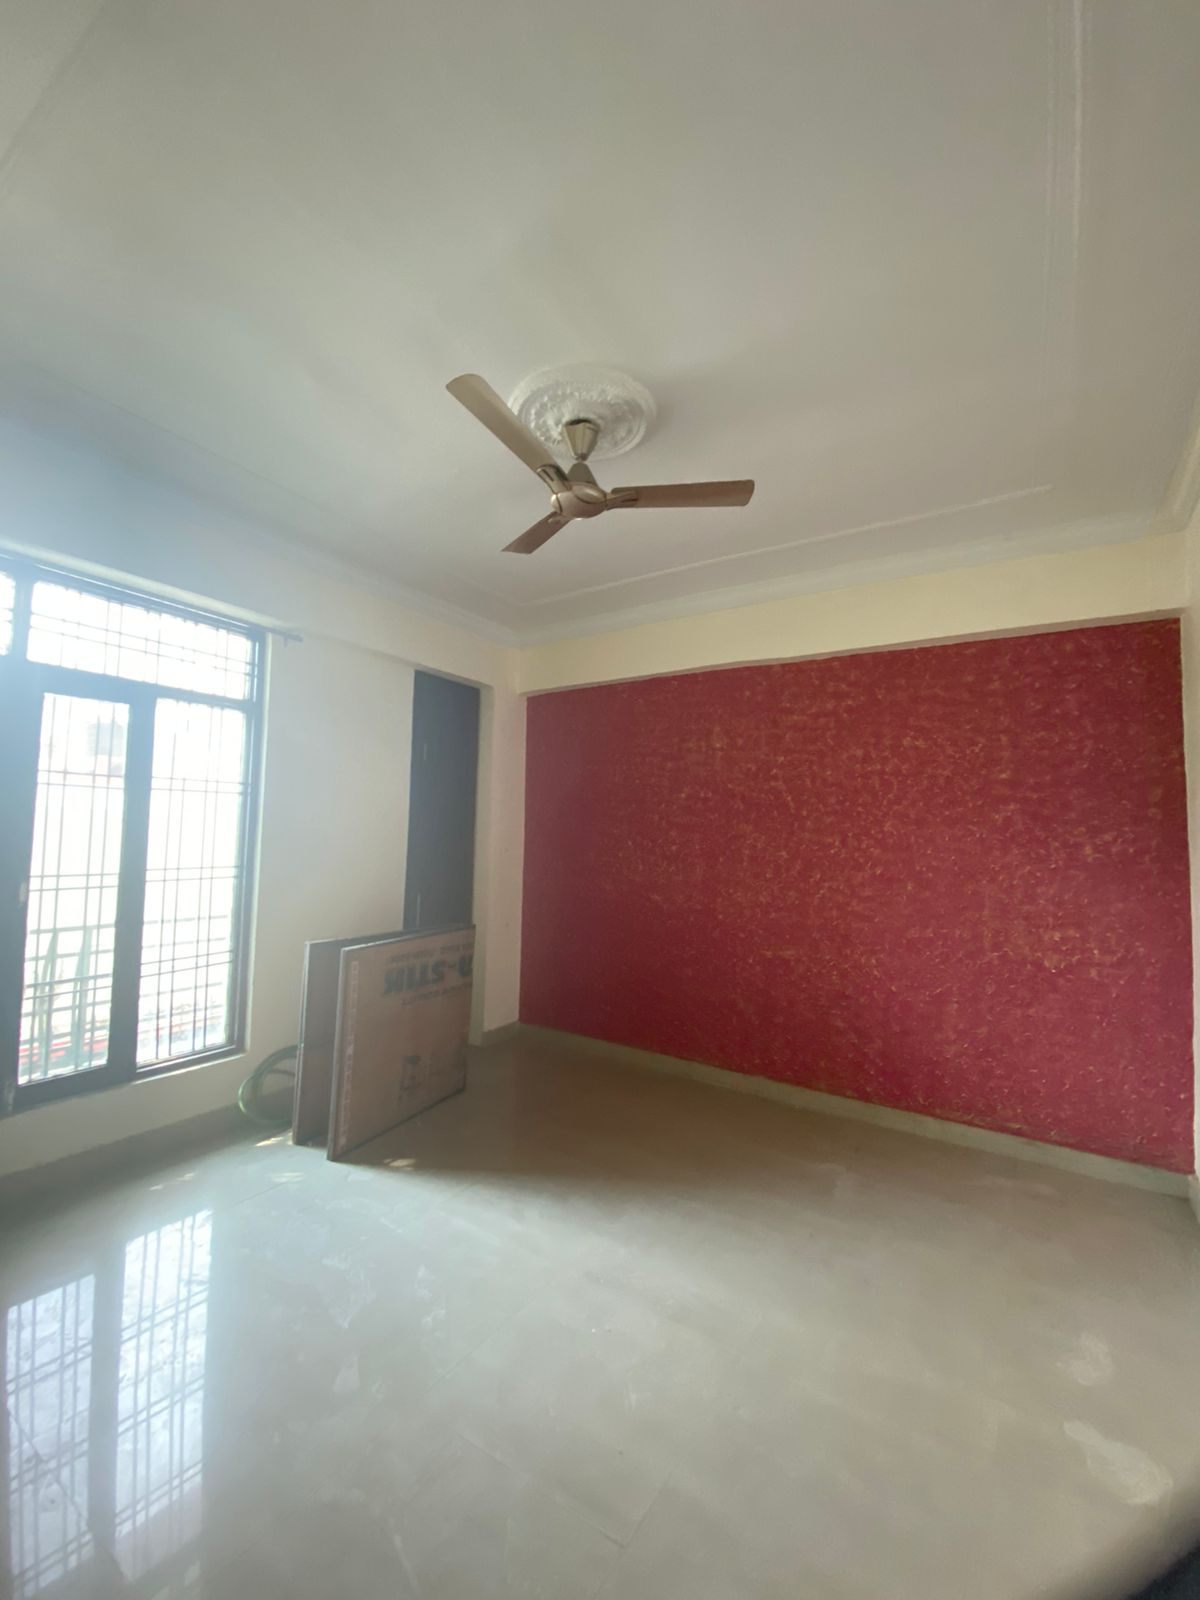 3 Bed/ 3 Bath Sell Apartment/ Flat; 1,600 sq. ft. carpet area; Ready To Move for sale @Dalibagh